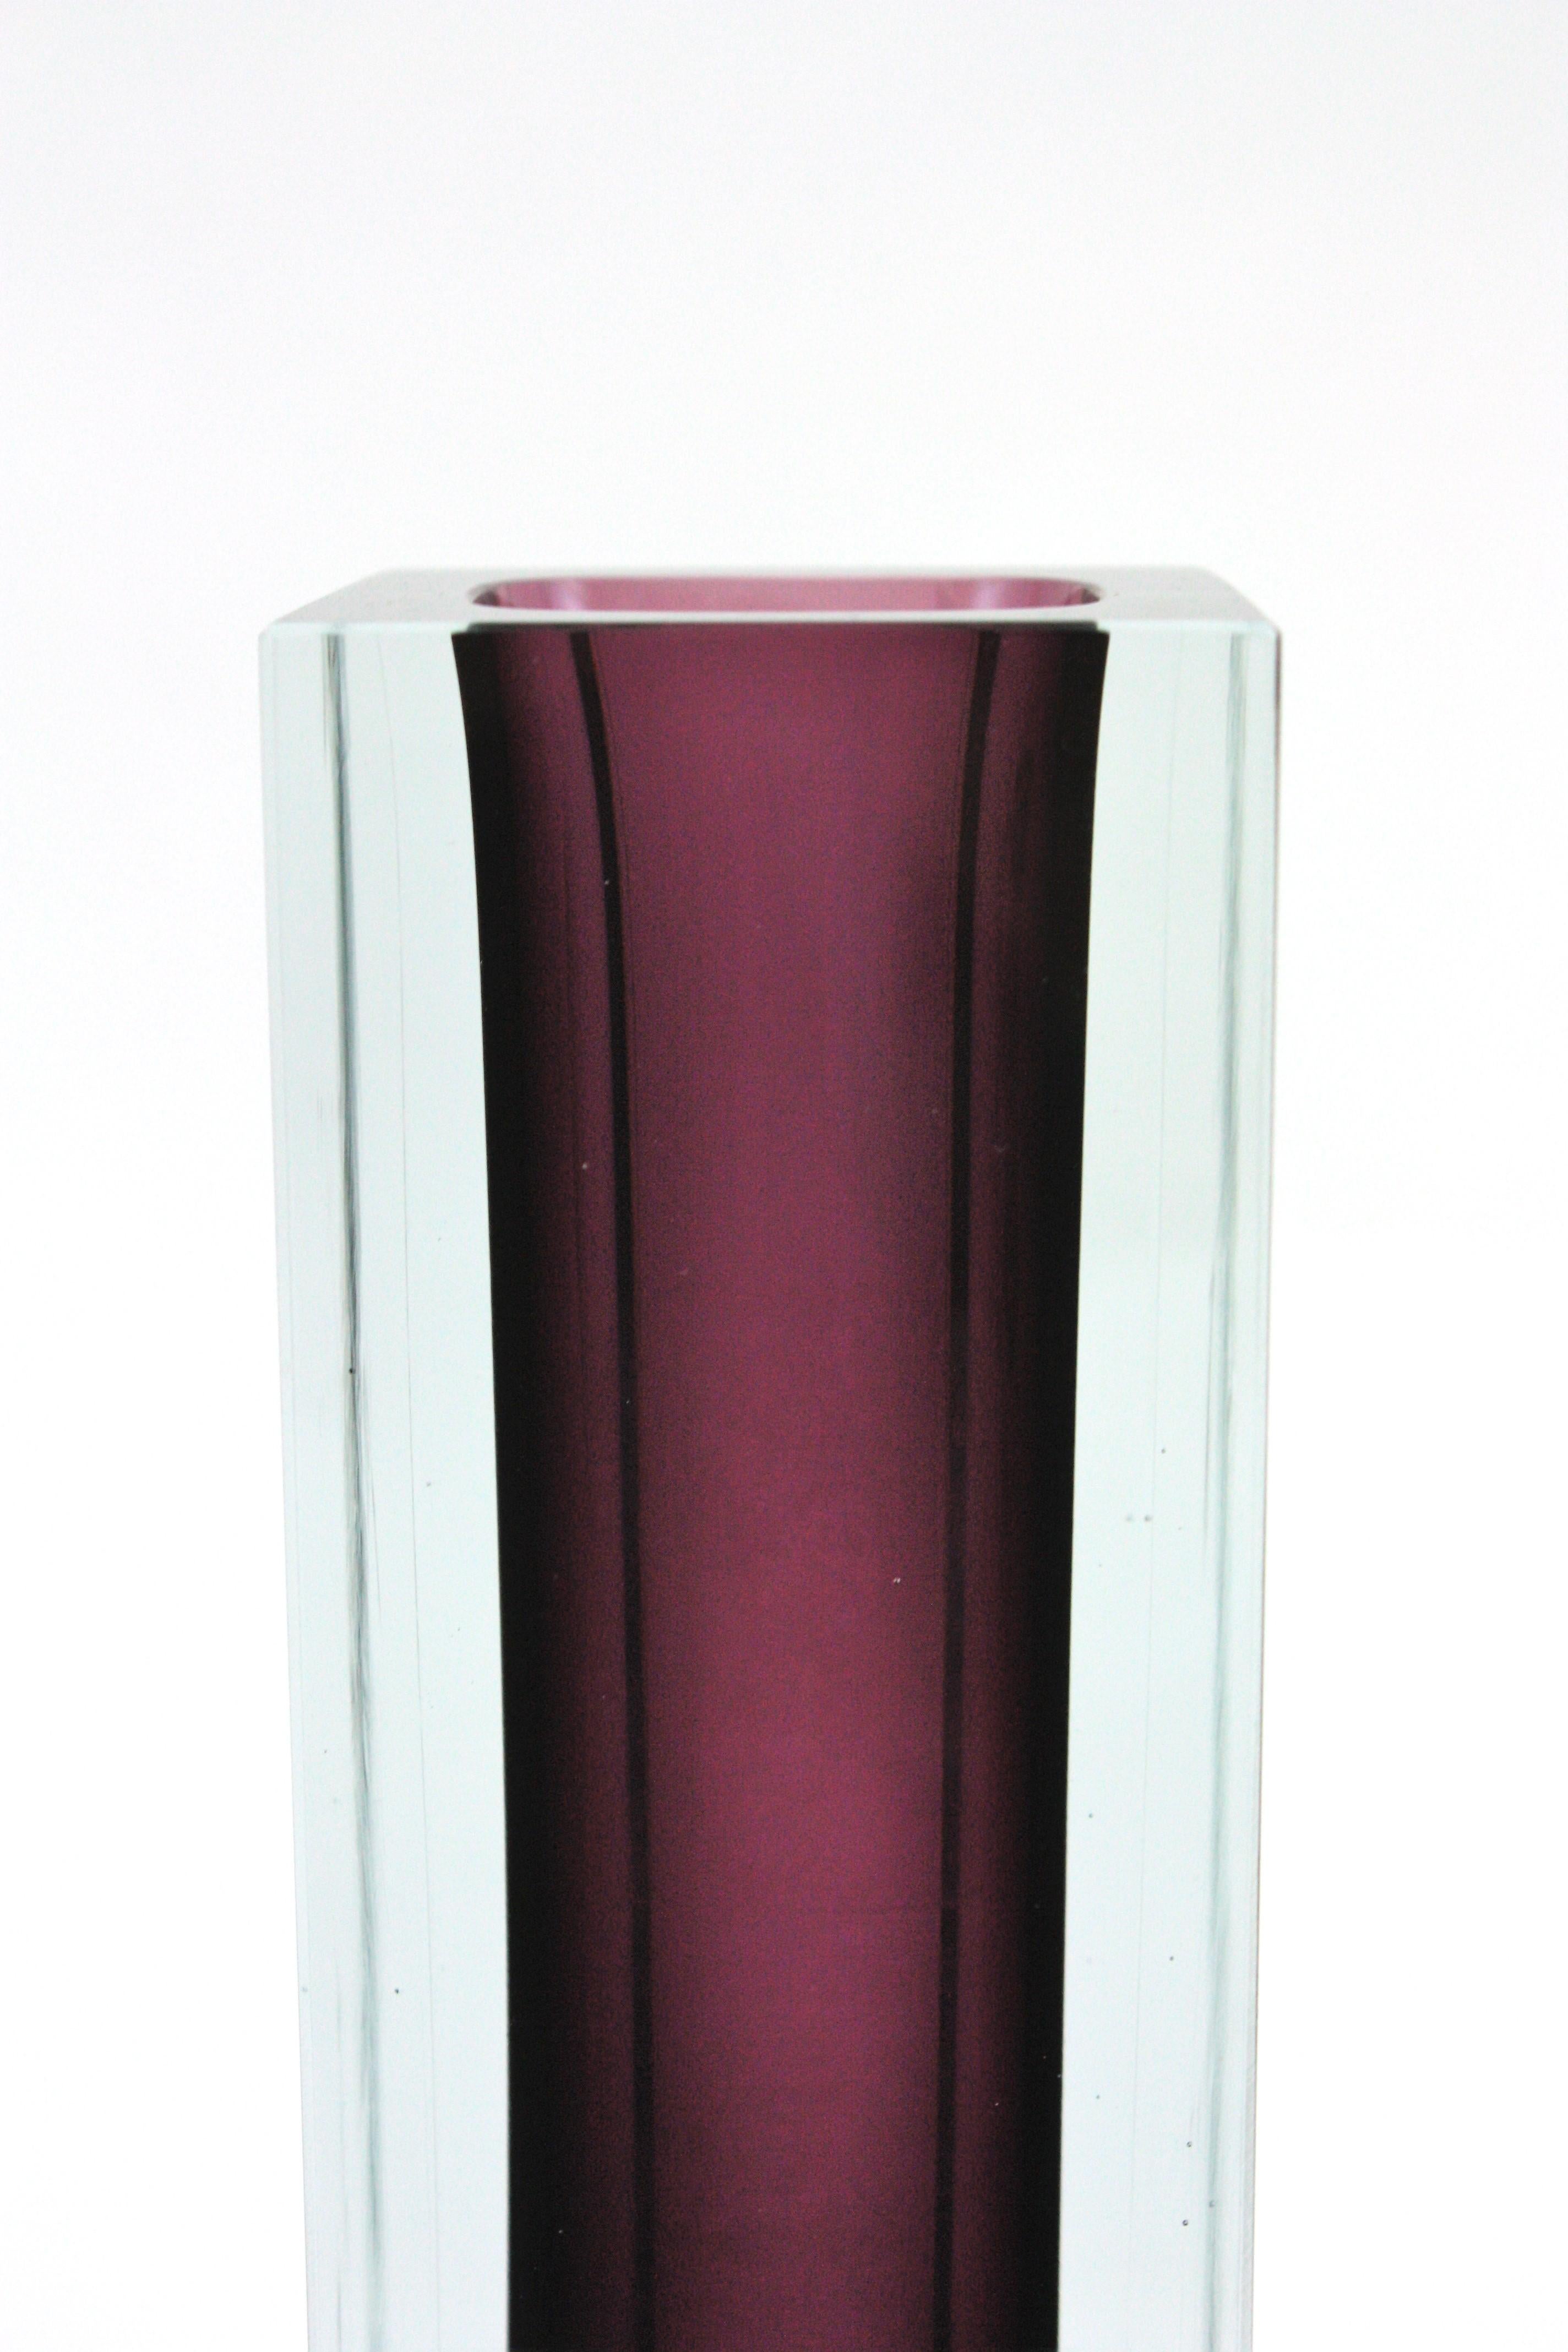 Giant Flavio Poli Murano Sommerso Purple Clear Faceted Art Glass Vase For Sale 7